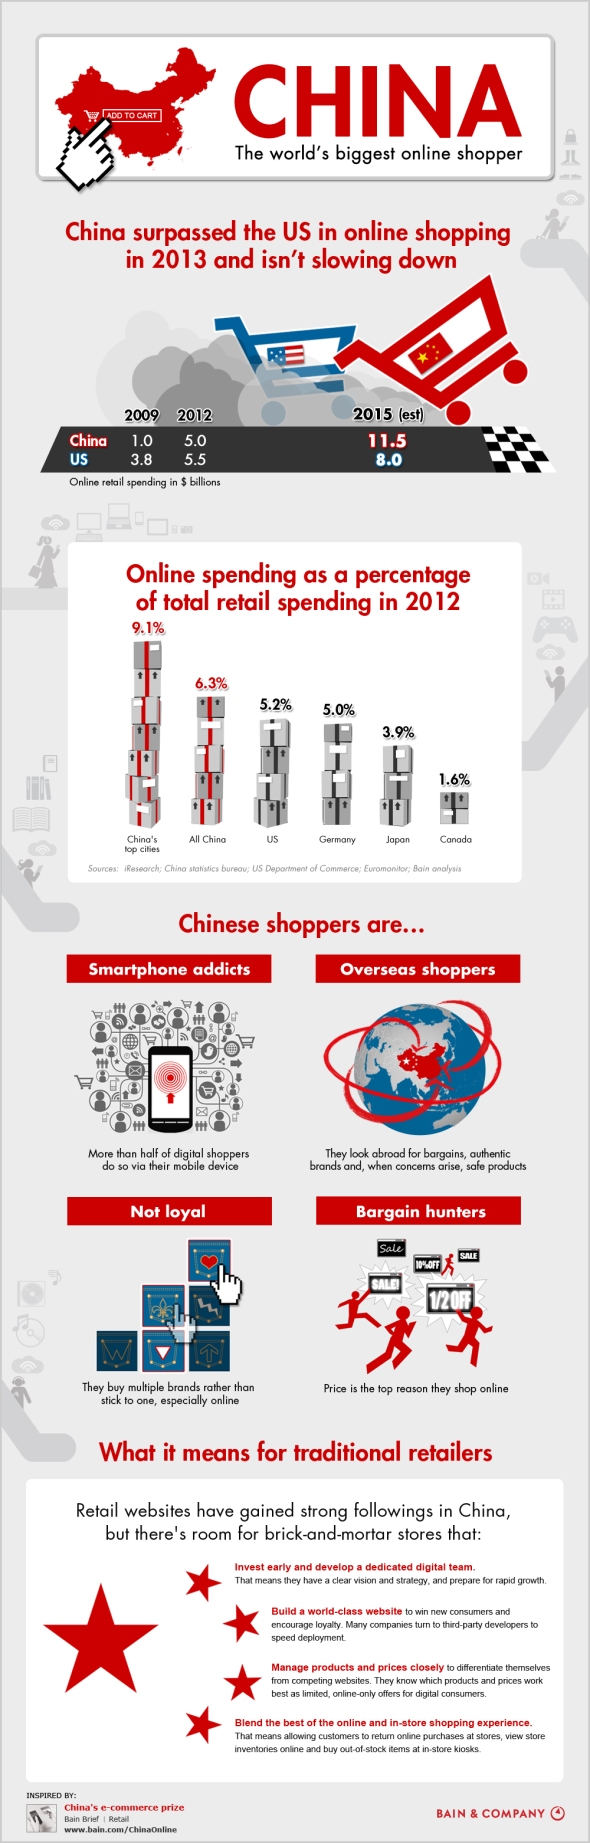 china-the-worlds-biggest-online-shopper-infographic-1000